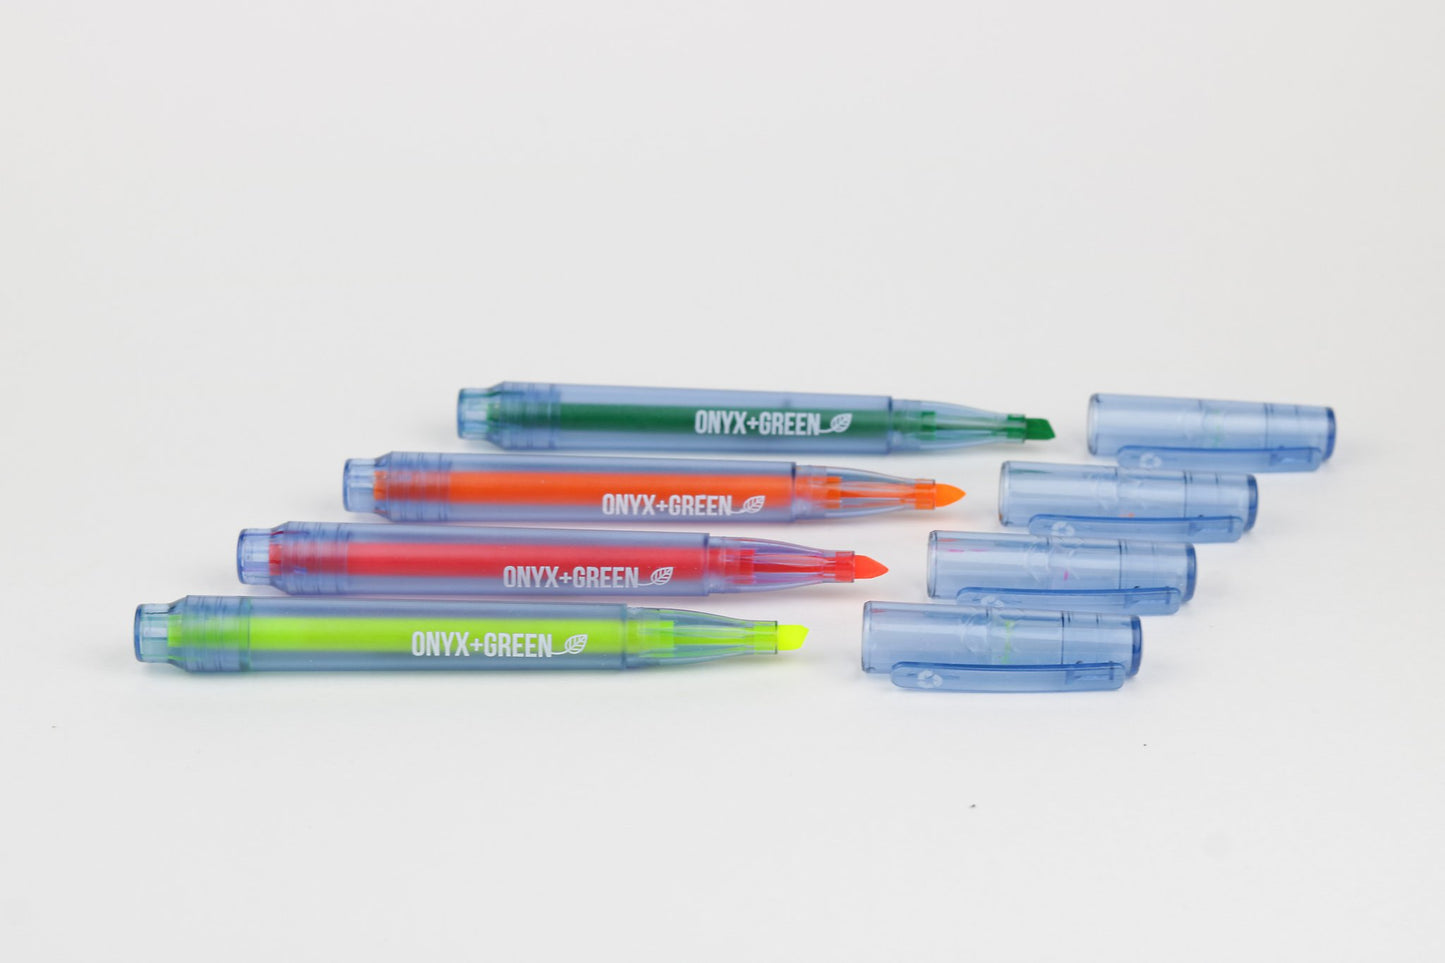 Recycled Water Bottle Highlighters